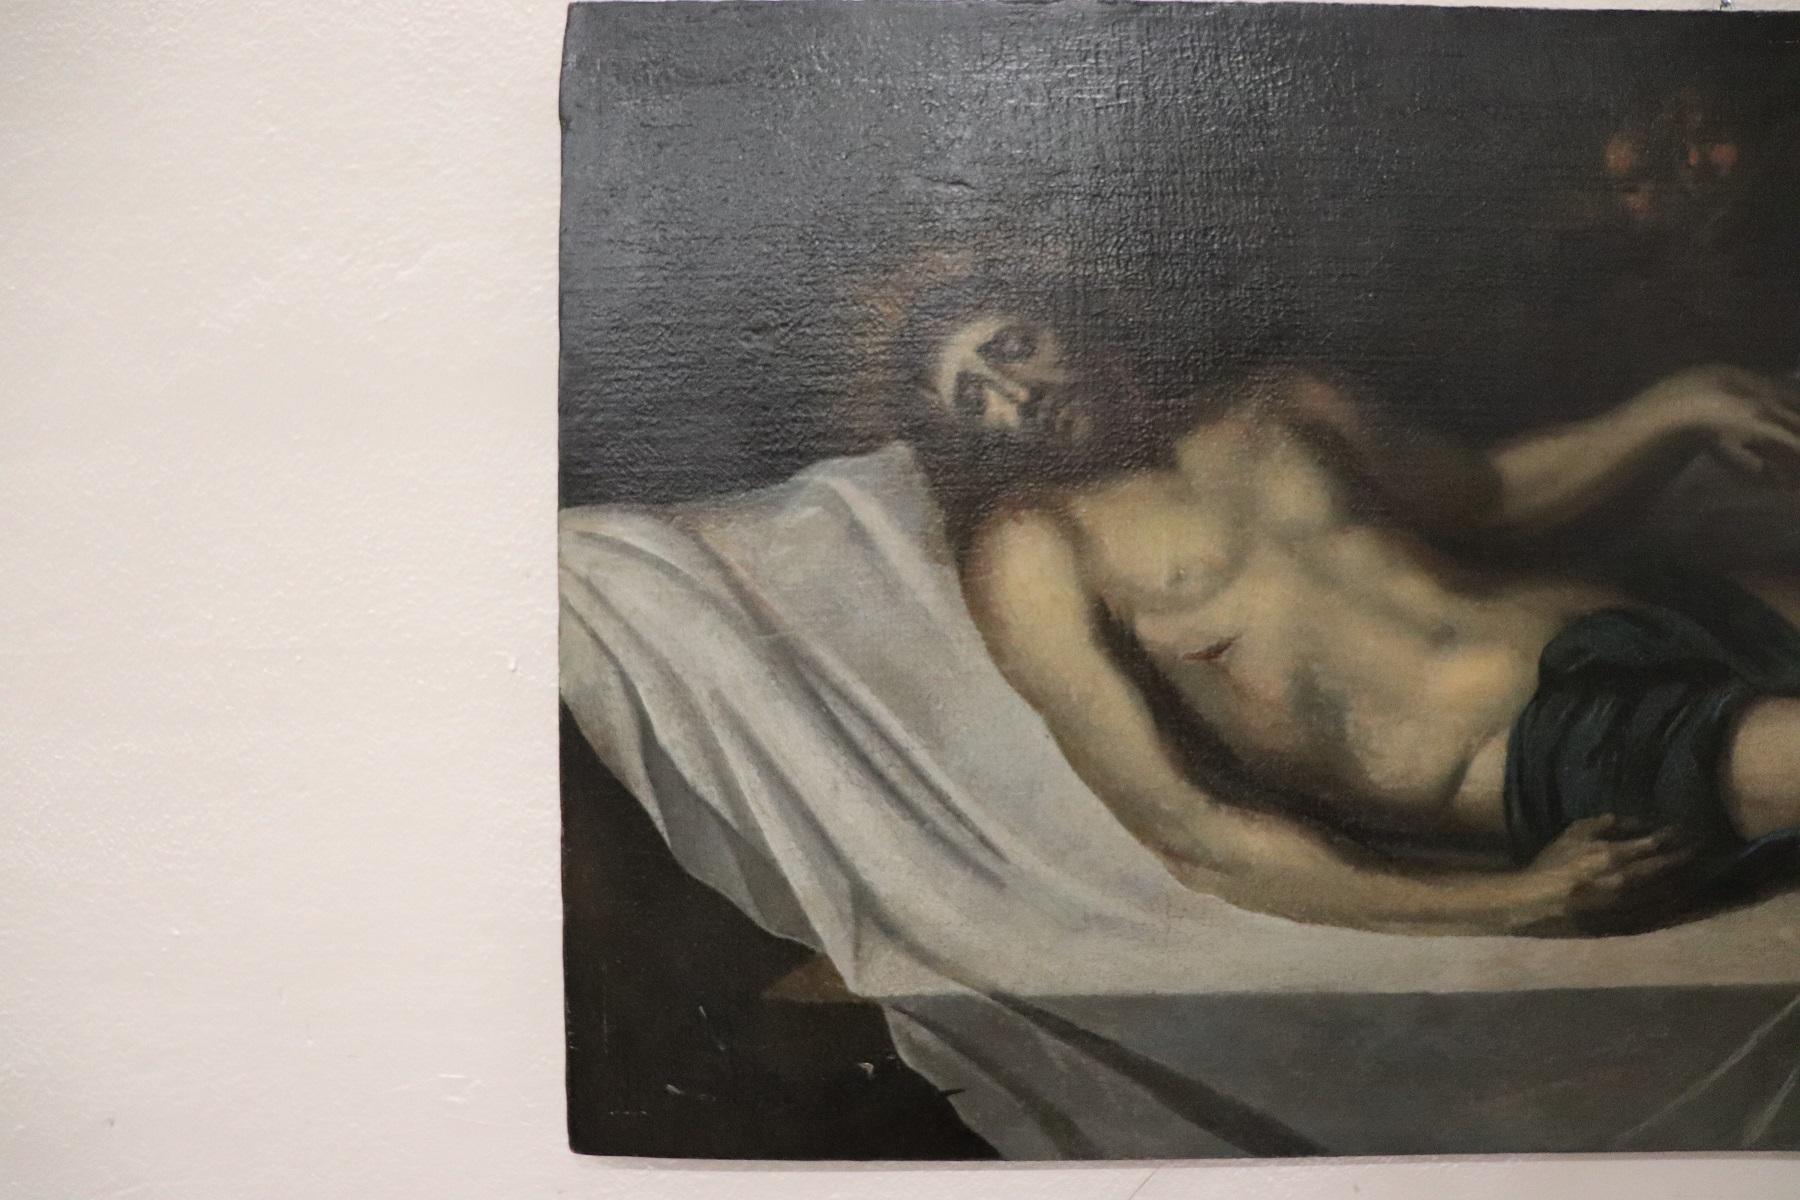 Important antique painting oil on canvas 18th century coming from an important collection of ancient paintings. It is a very recurring subject in religious painting, Christ laid down after death on the cross. The work is of high artistic quality.